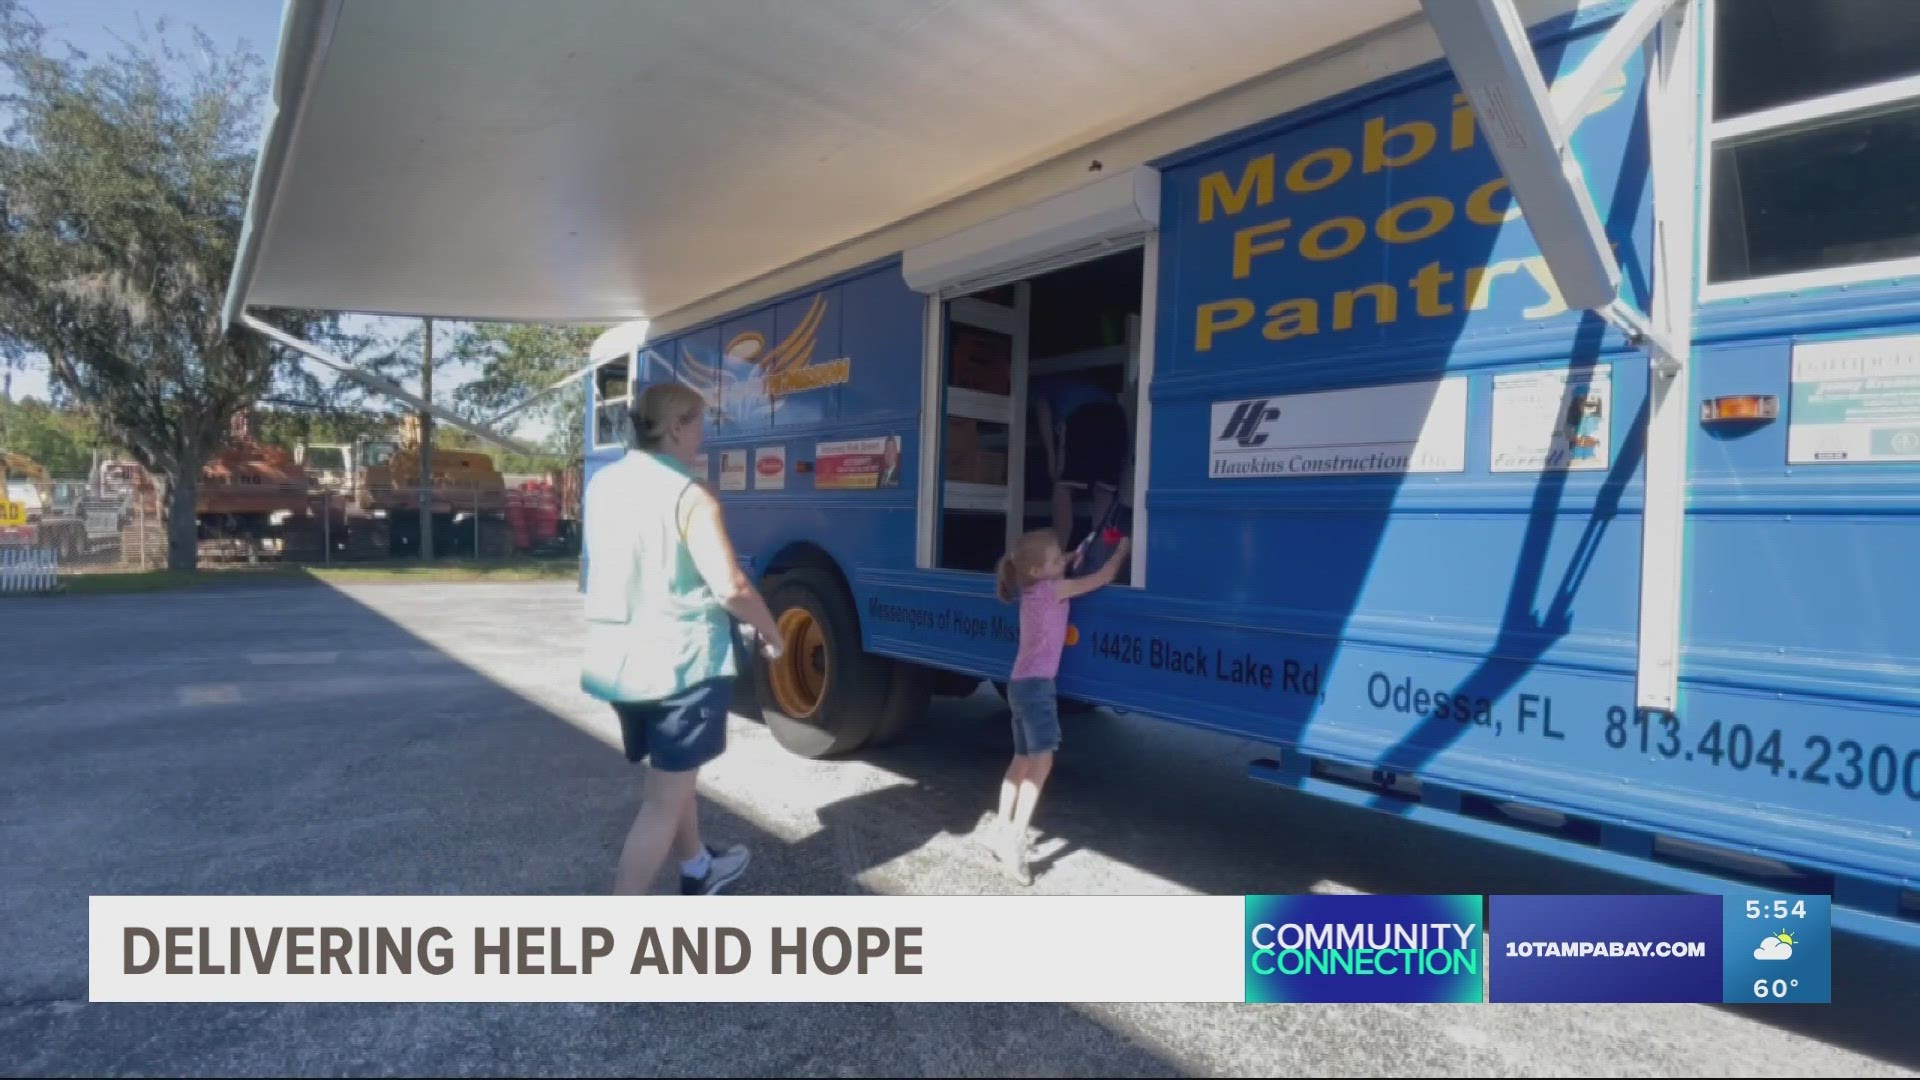 The Messengers of Hope Mission helps feed the hungry in Pasco County.